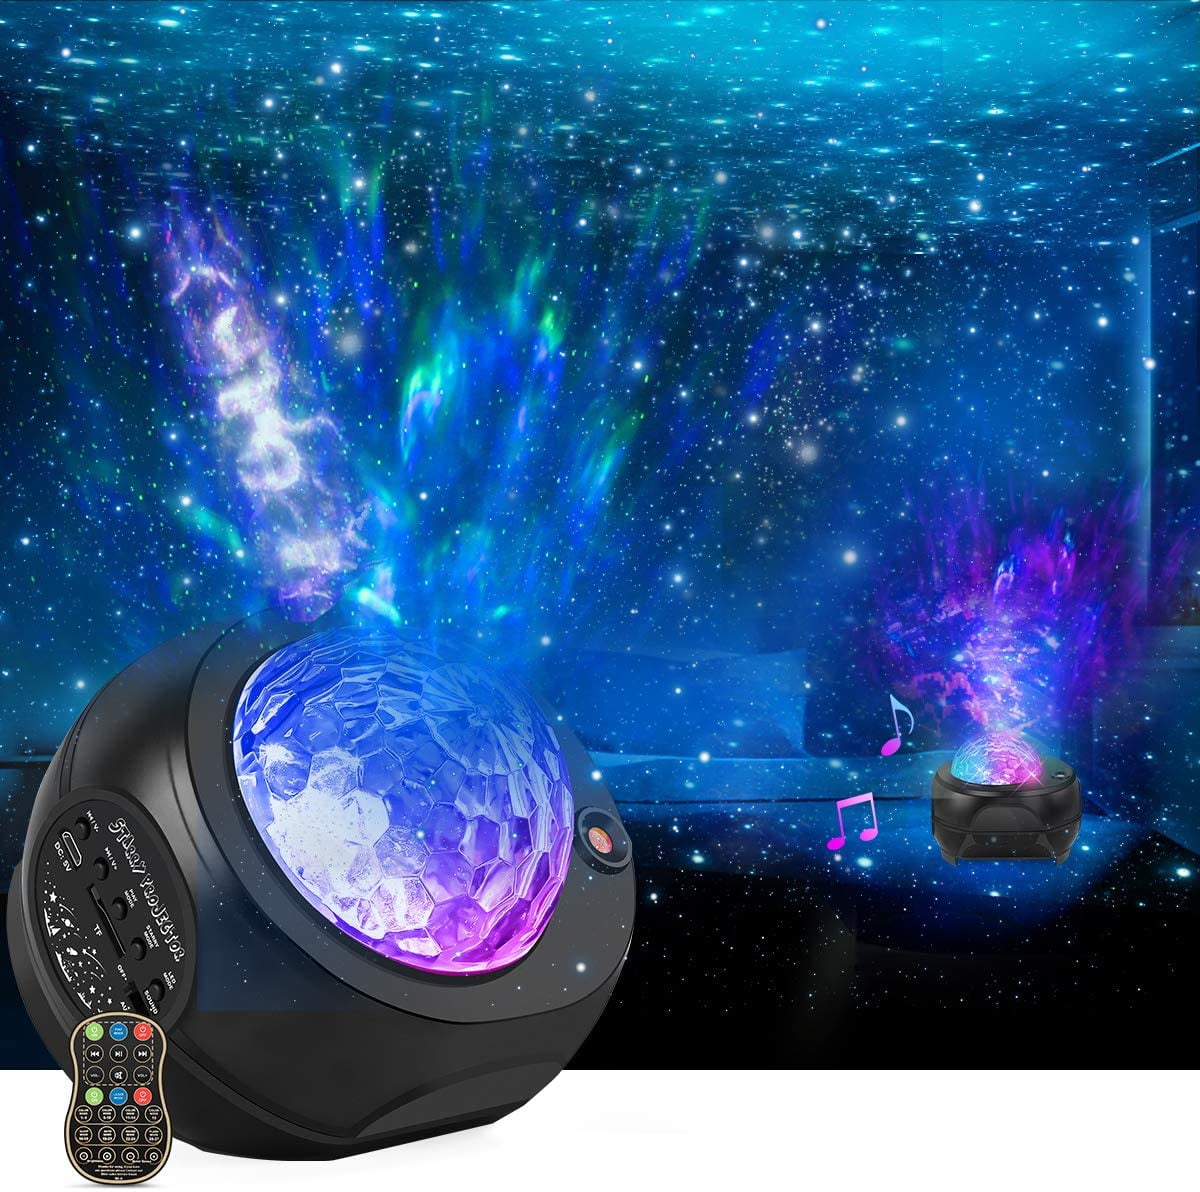 EIMELI Star Projector Night Lights, 3 in 1 Galaxy Projector Light, Sky  Nebula/Moving Ocean Wave, Best Gift for Kids Adults for Bedroom/Party with  